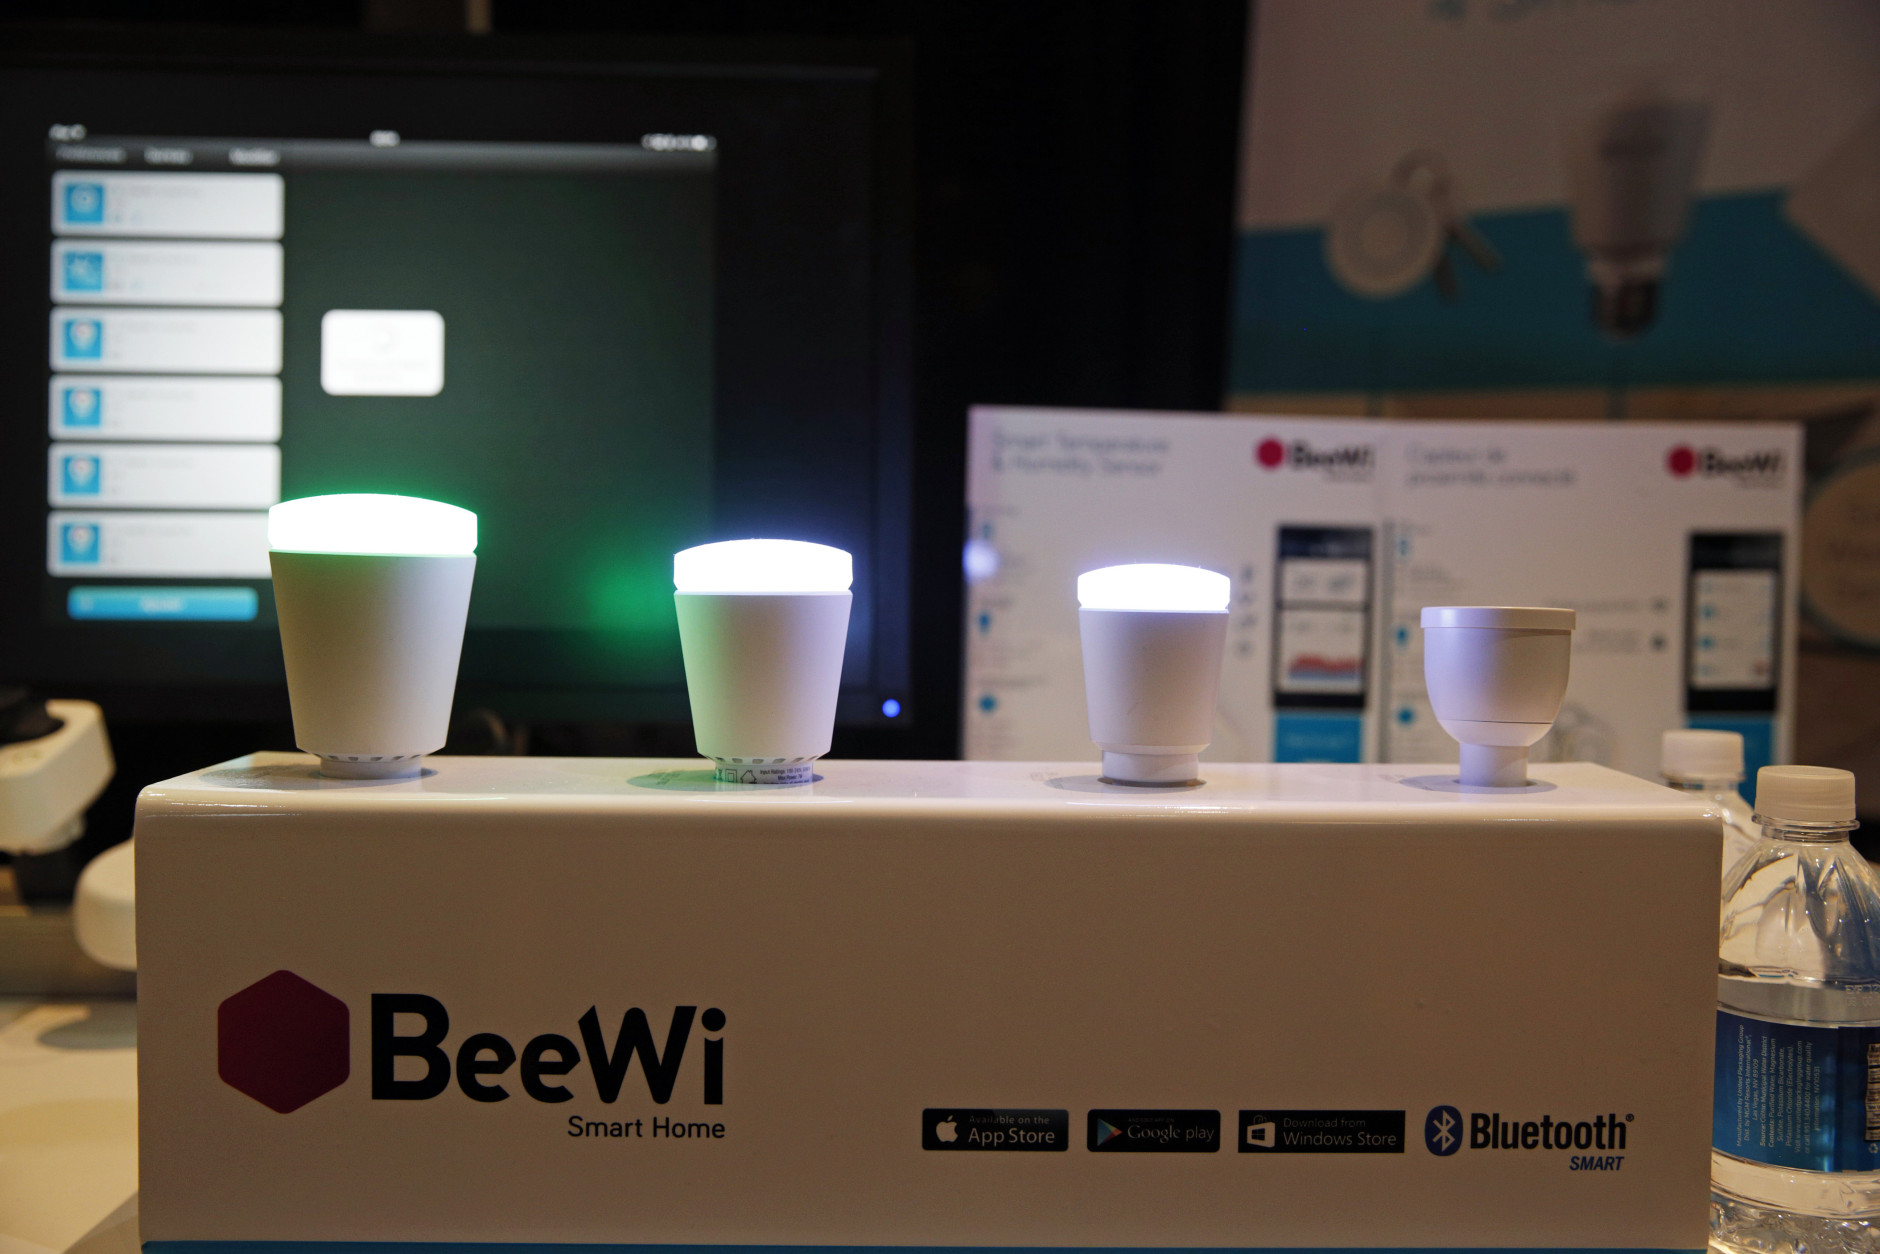 BeeWi wirelessly controlled lights are on display at CES Unveiled, a media preview event for CES International, Sunday, Jan. 4, 2015, in Las Vegas. (AP Photo/John Locher)